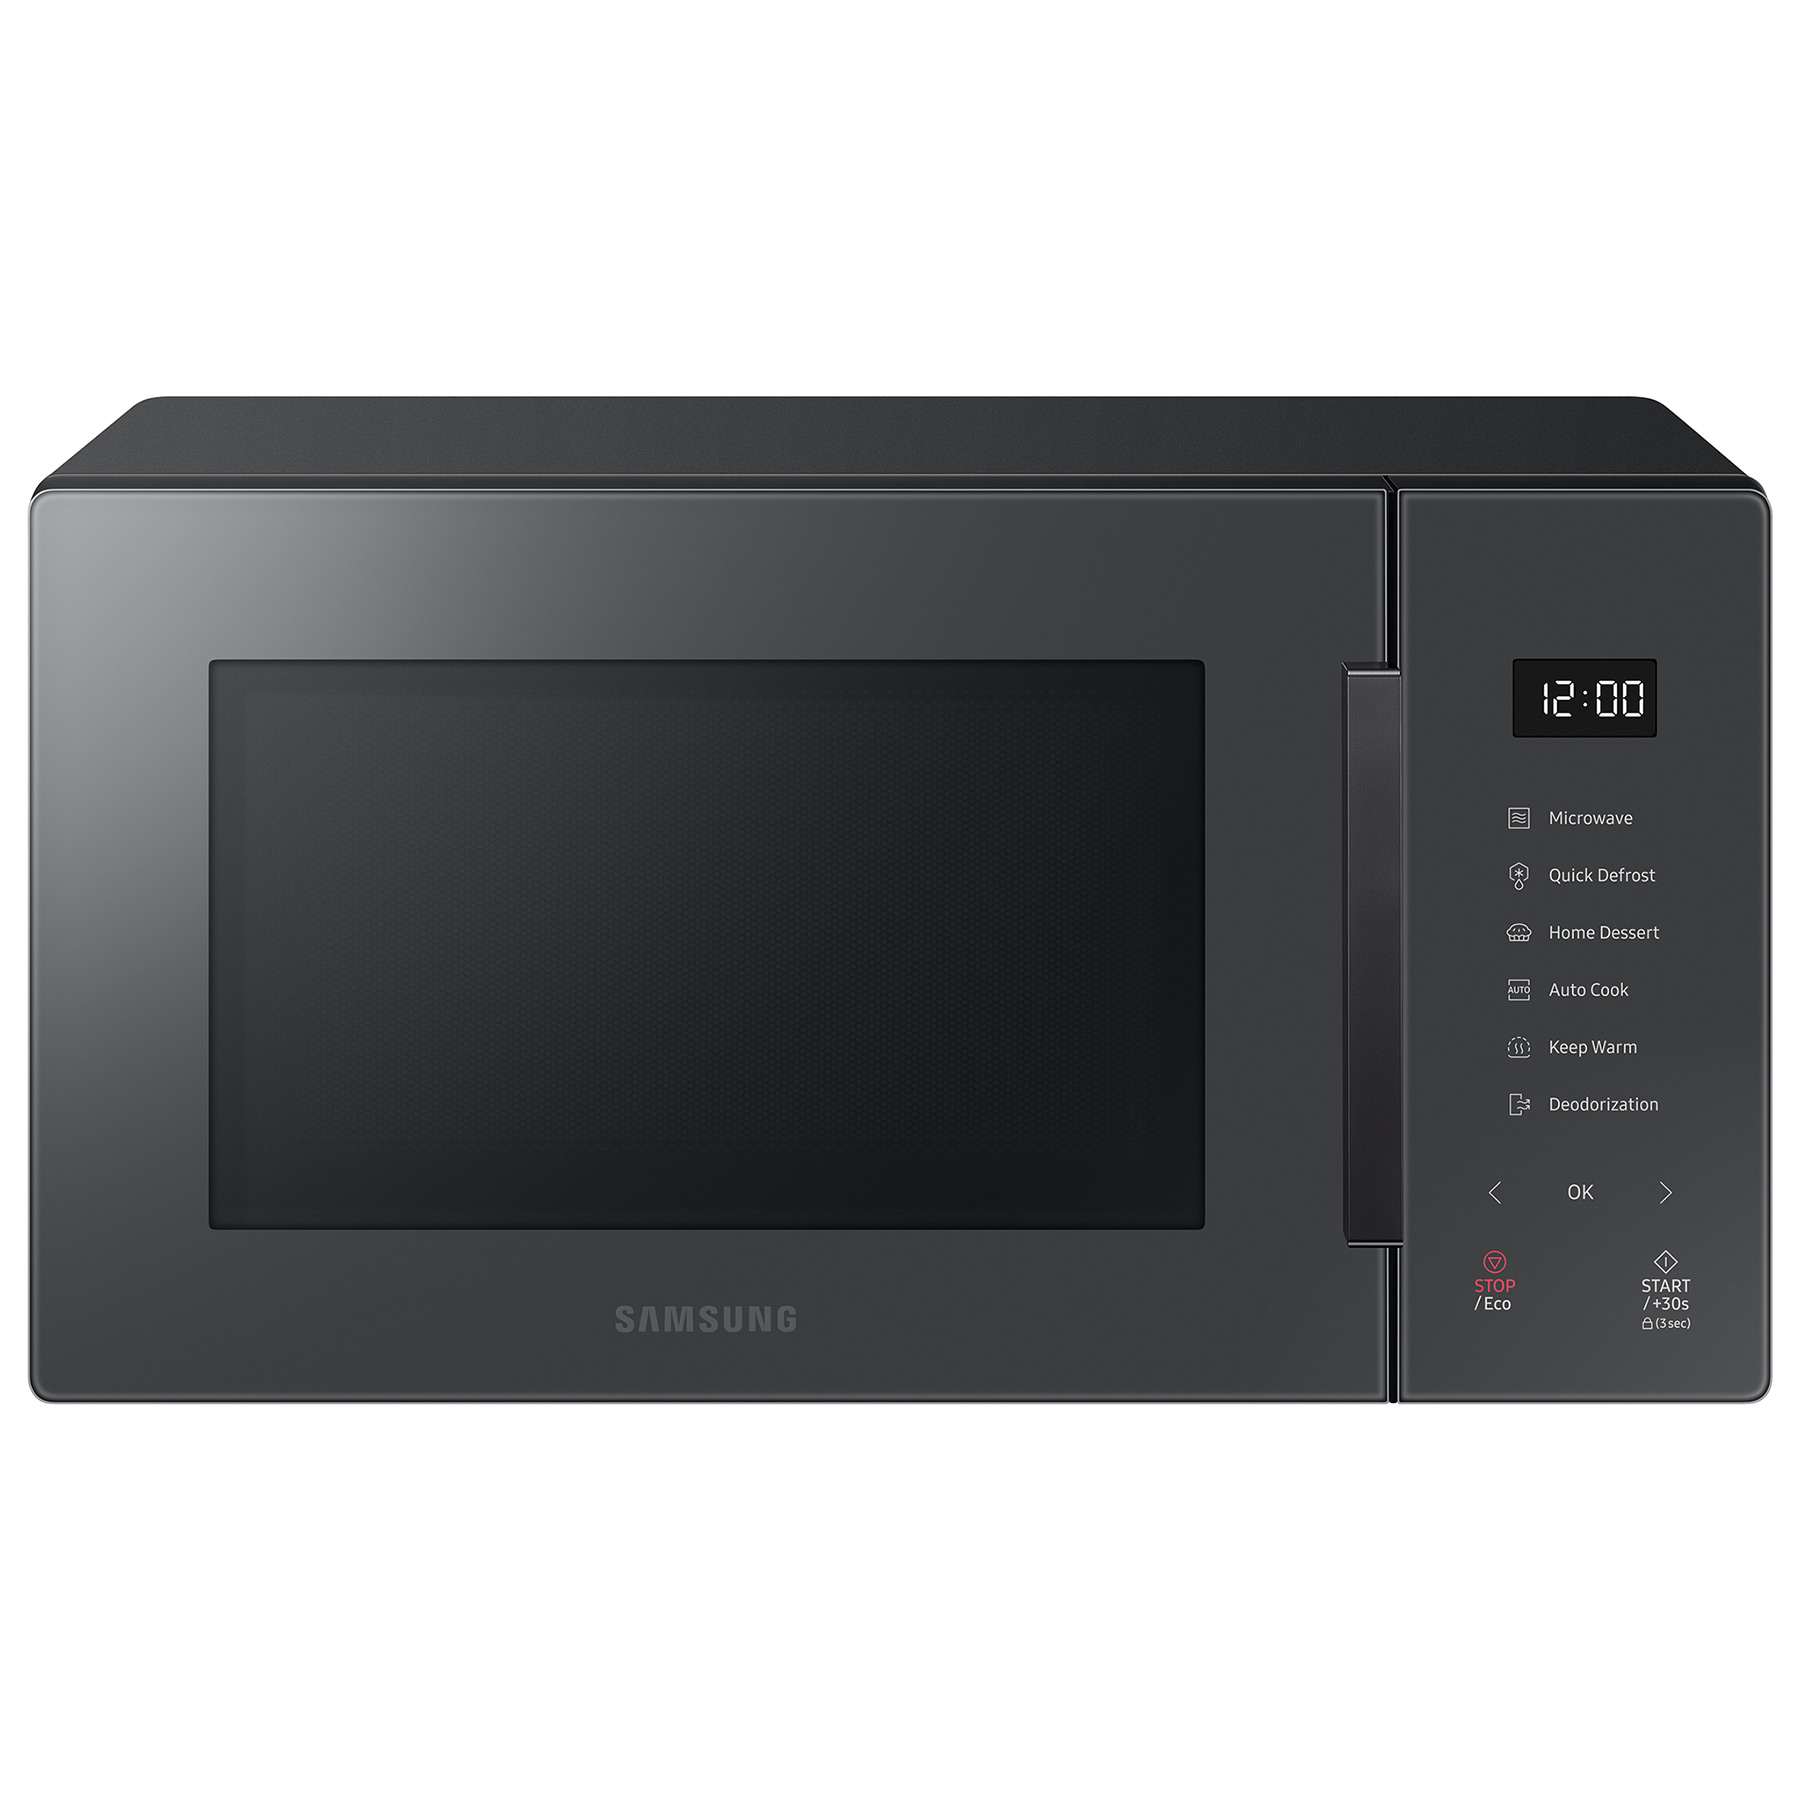 Image of Samsung MS23T5018AC Microwave Oven in Charcoal Grey 23 Litre 800W